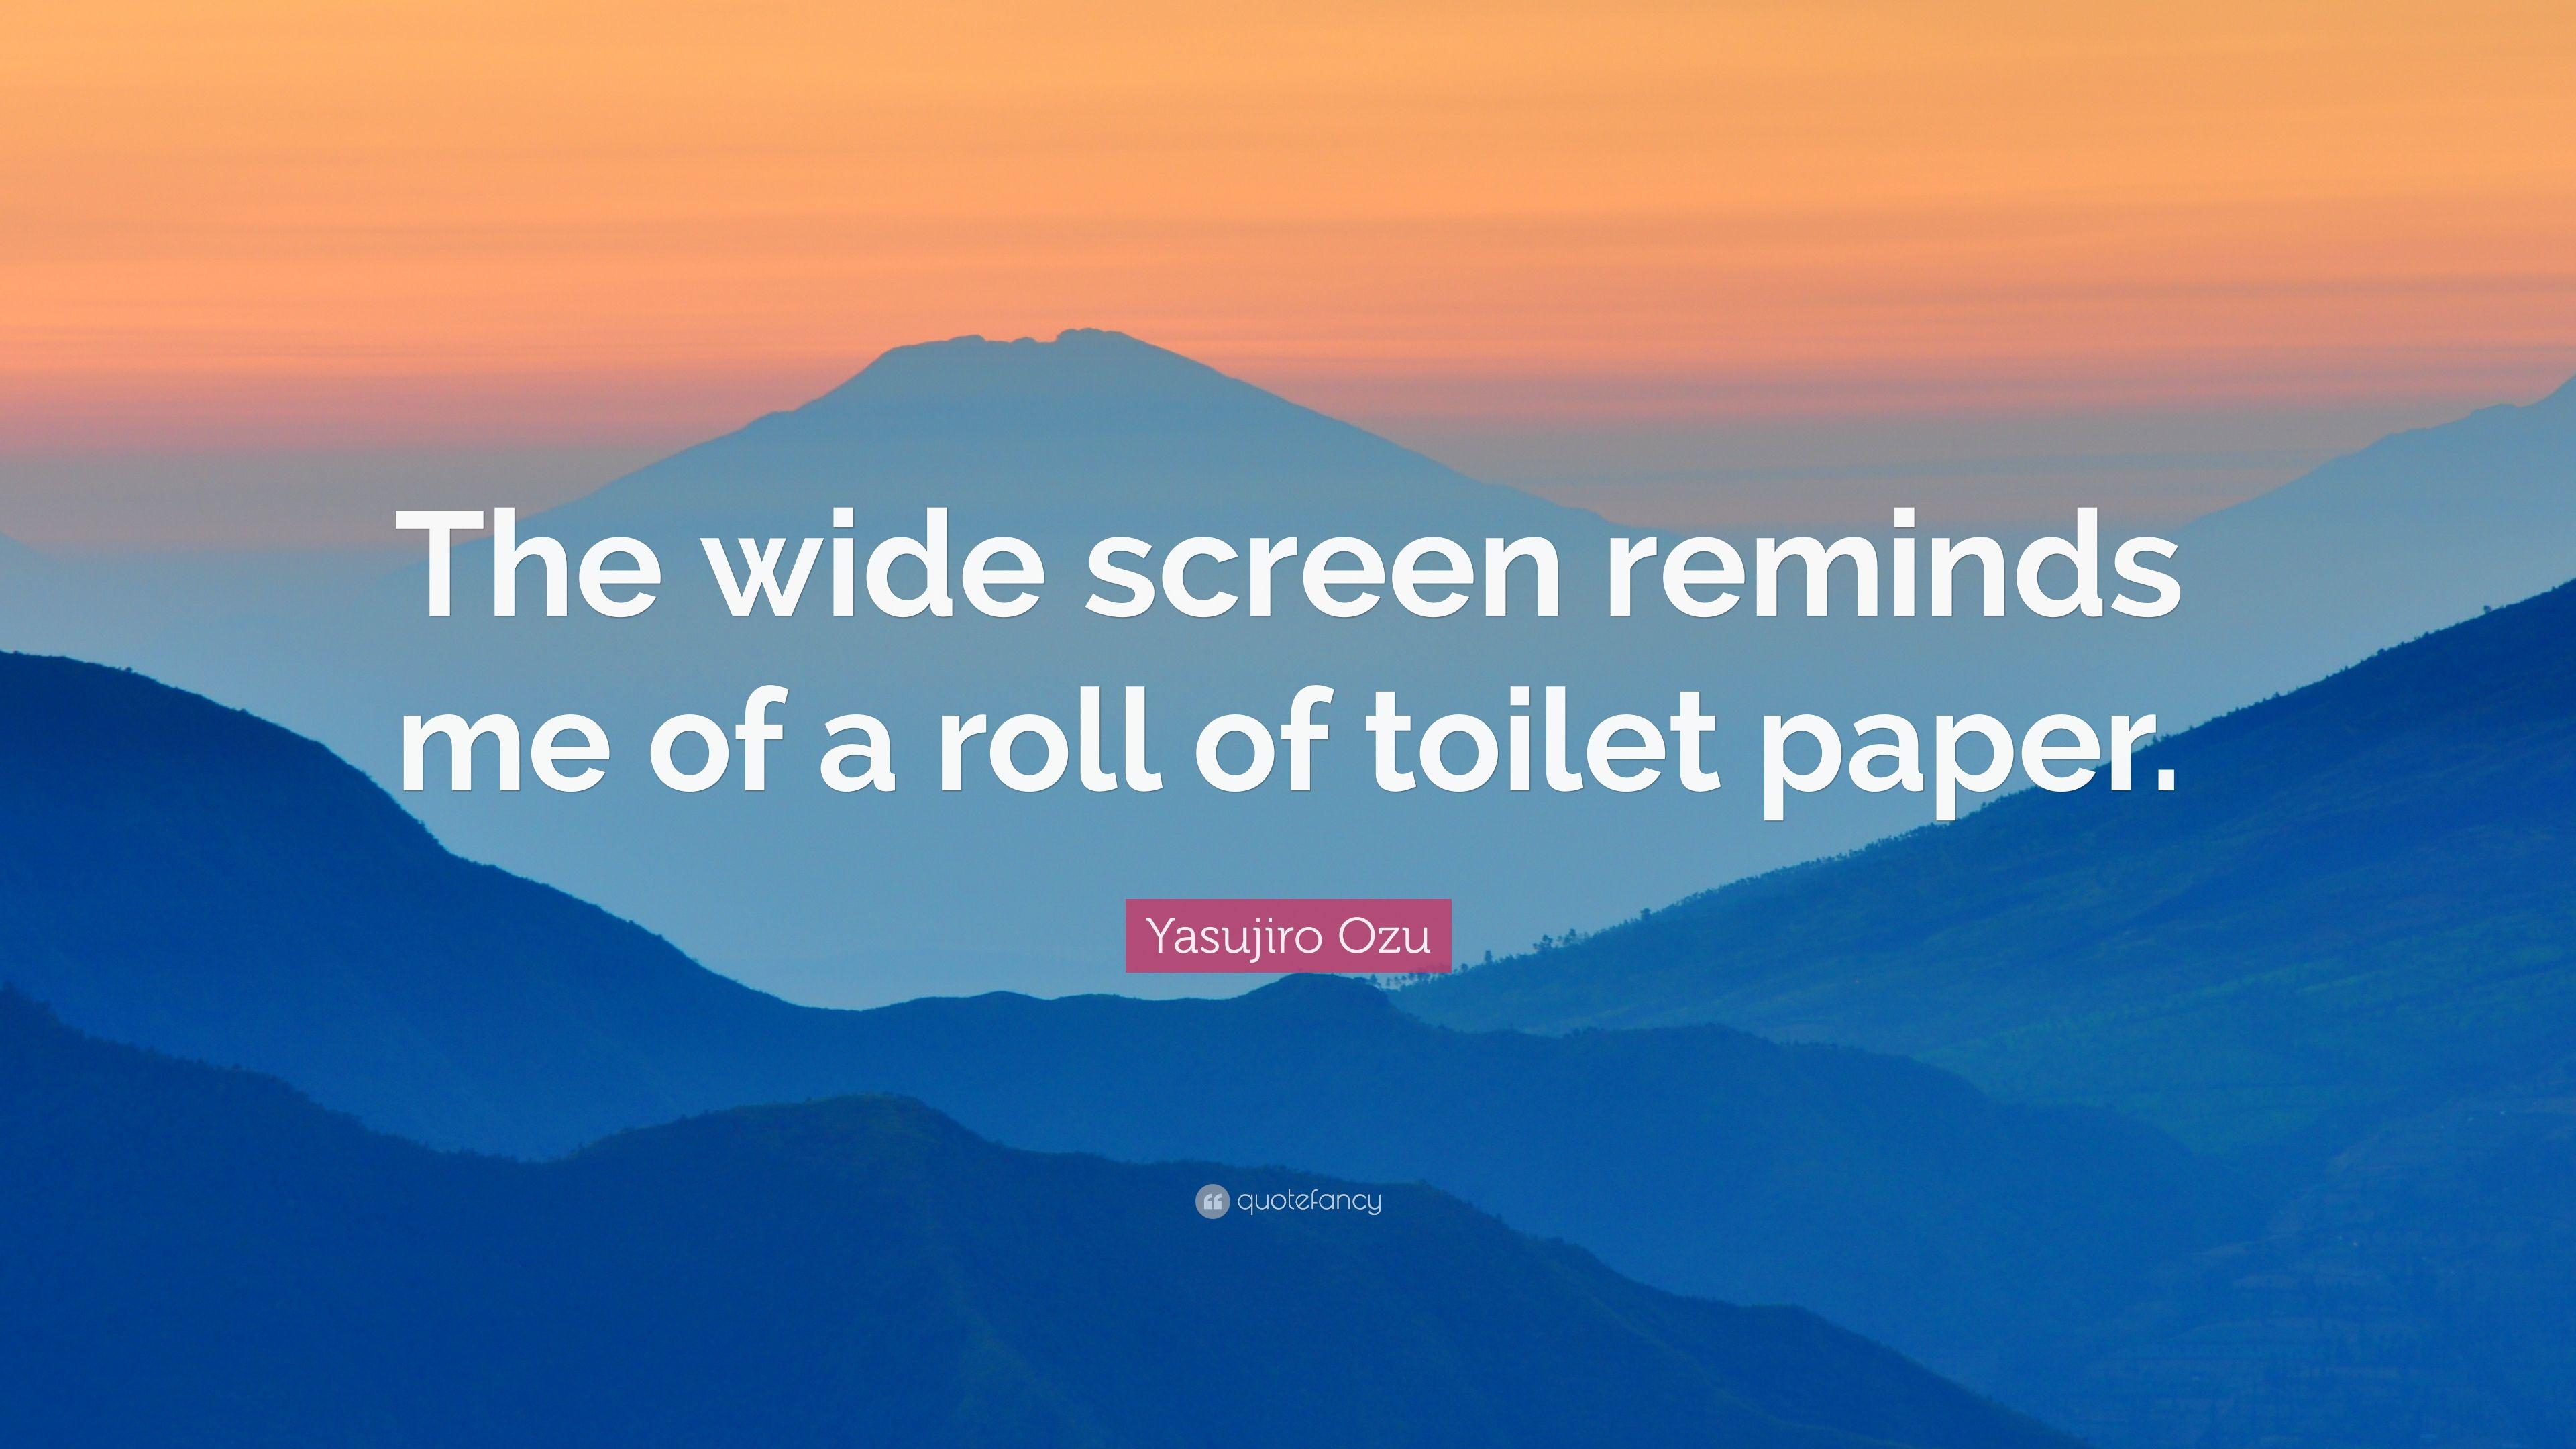 Yasujiro Ozu Quote: “The wide screen reminds me of a roll of toilet